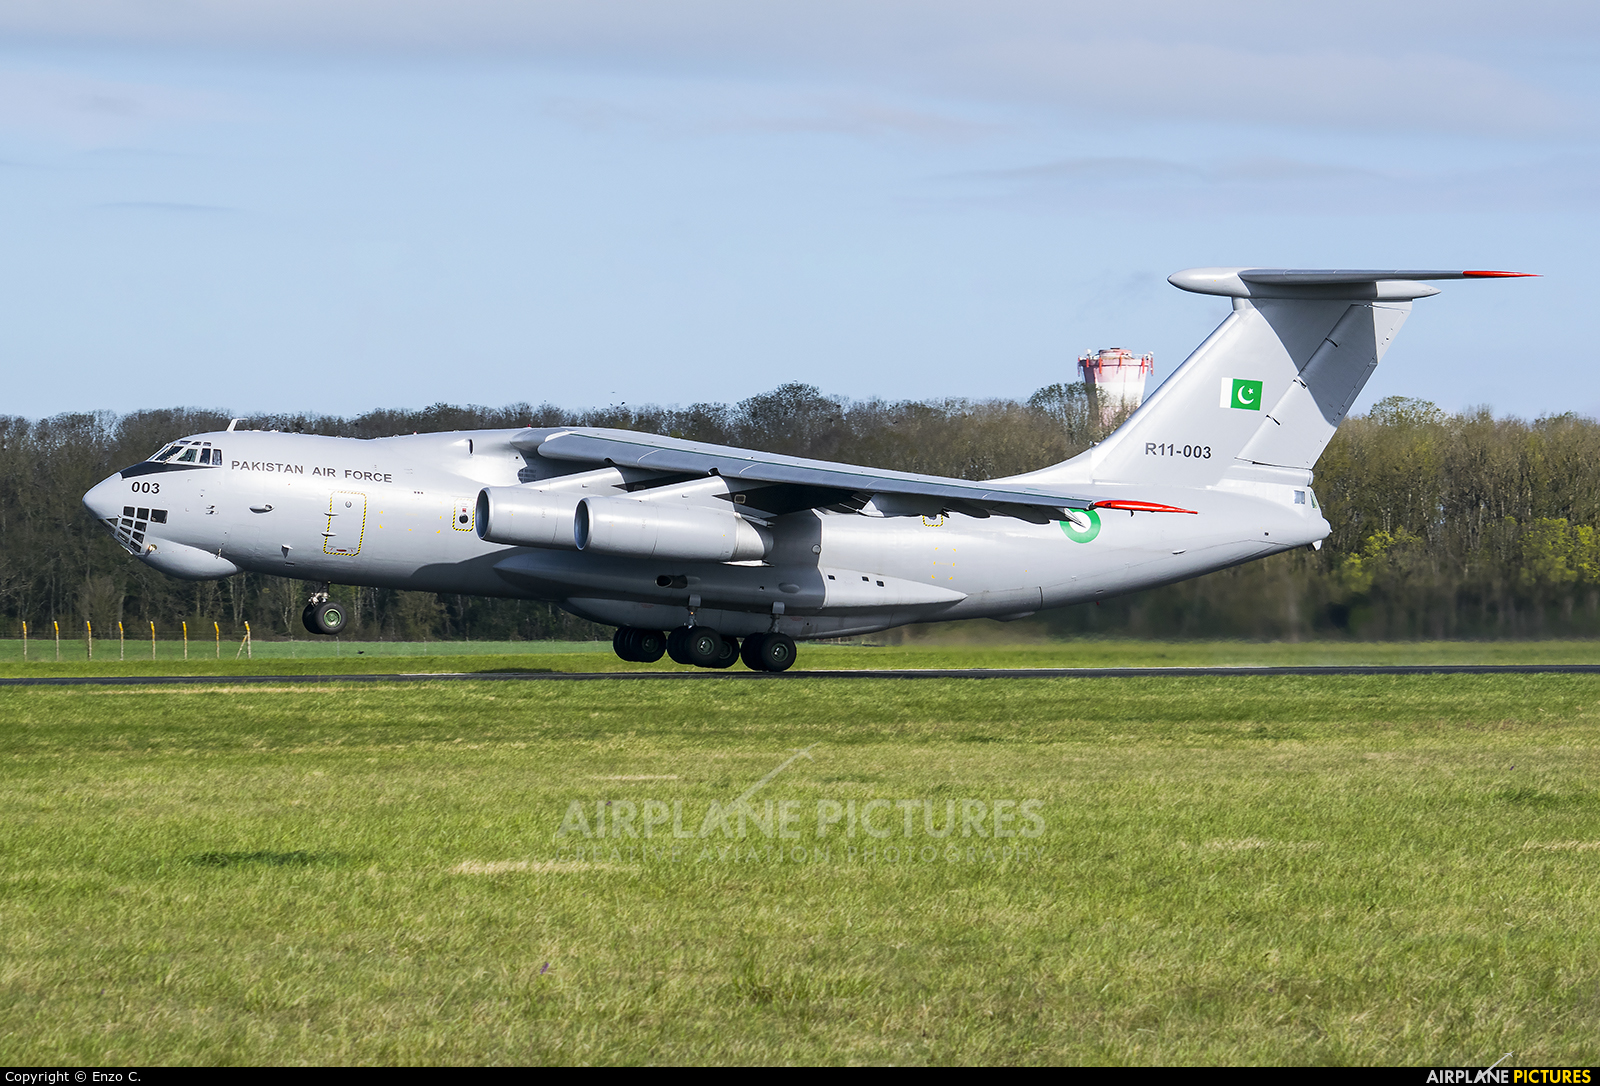 Pakistan - Air Force R11-003 aircraft at Chateauroux - Deols (Marcel Dassault)